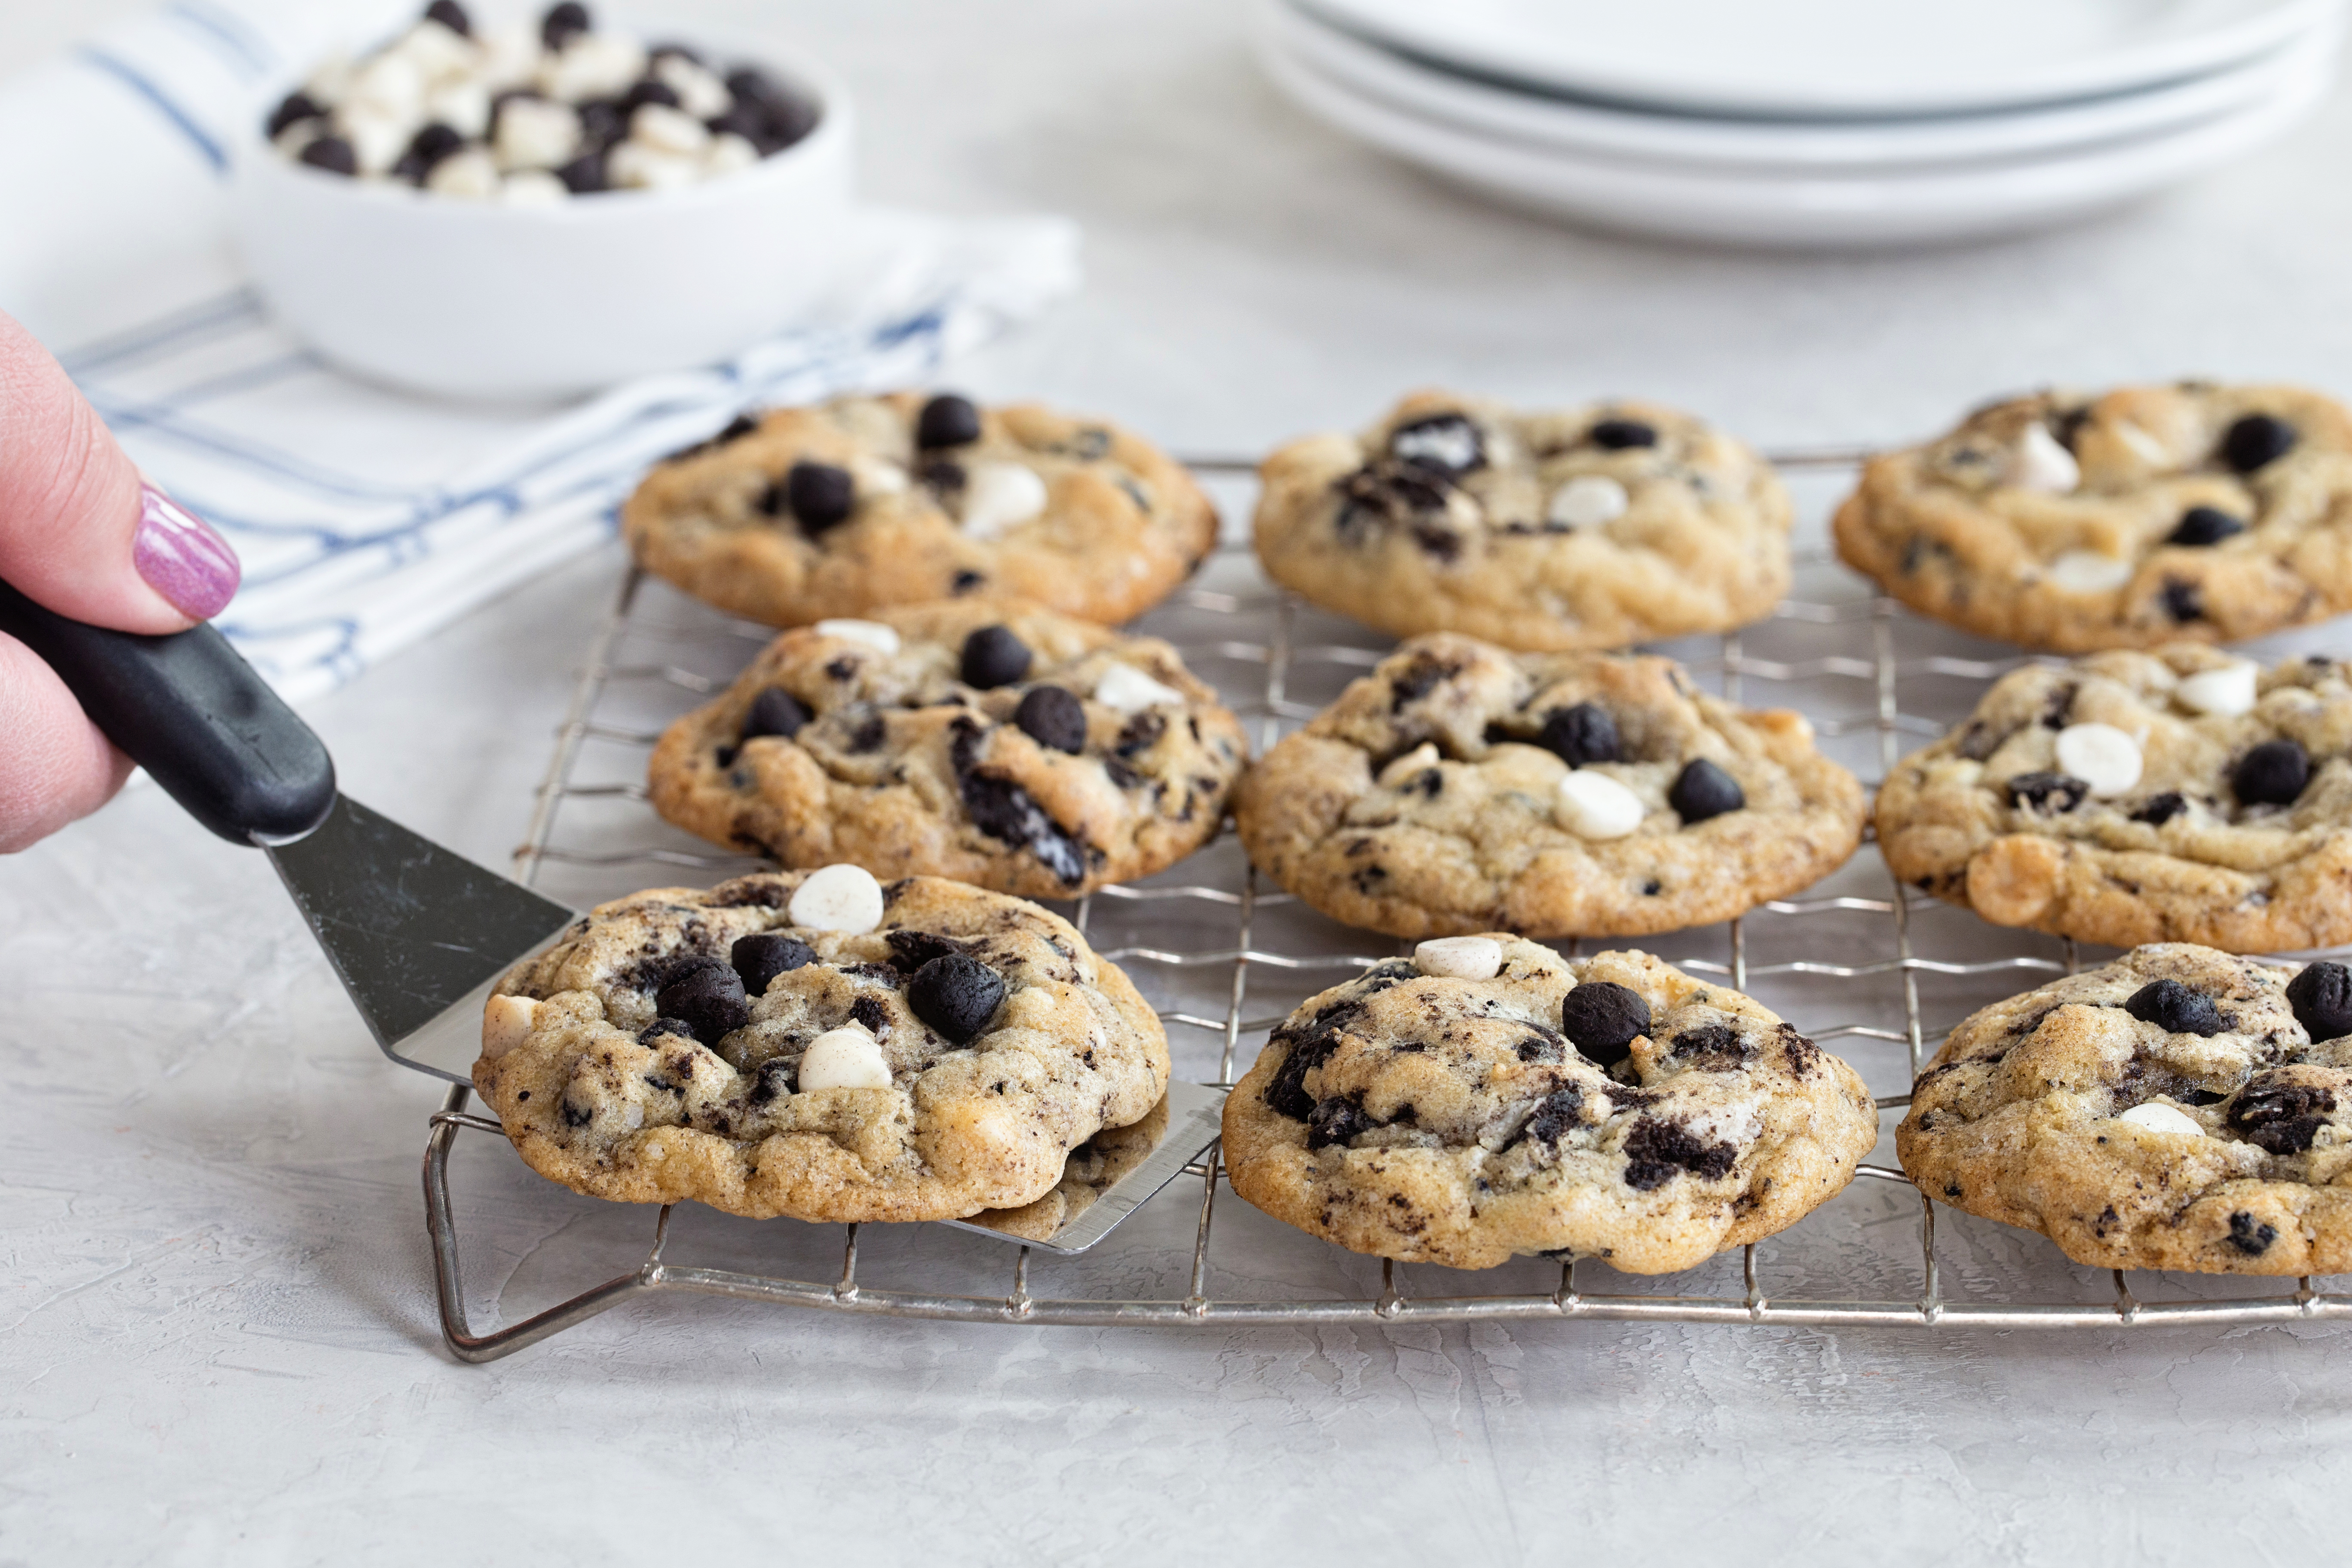 Cookies 'N' Creme Cookies by Hershey's Kitchen in partnership with My Baking Addiction